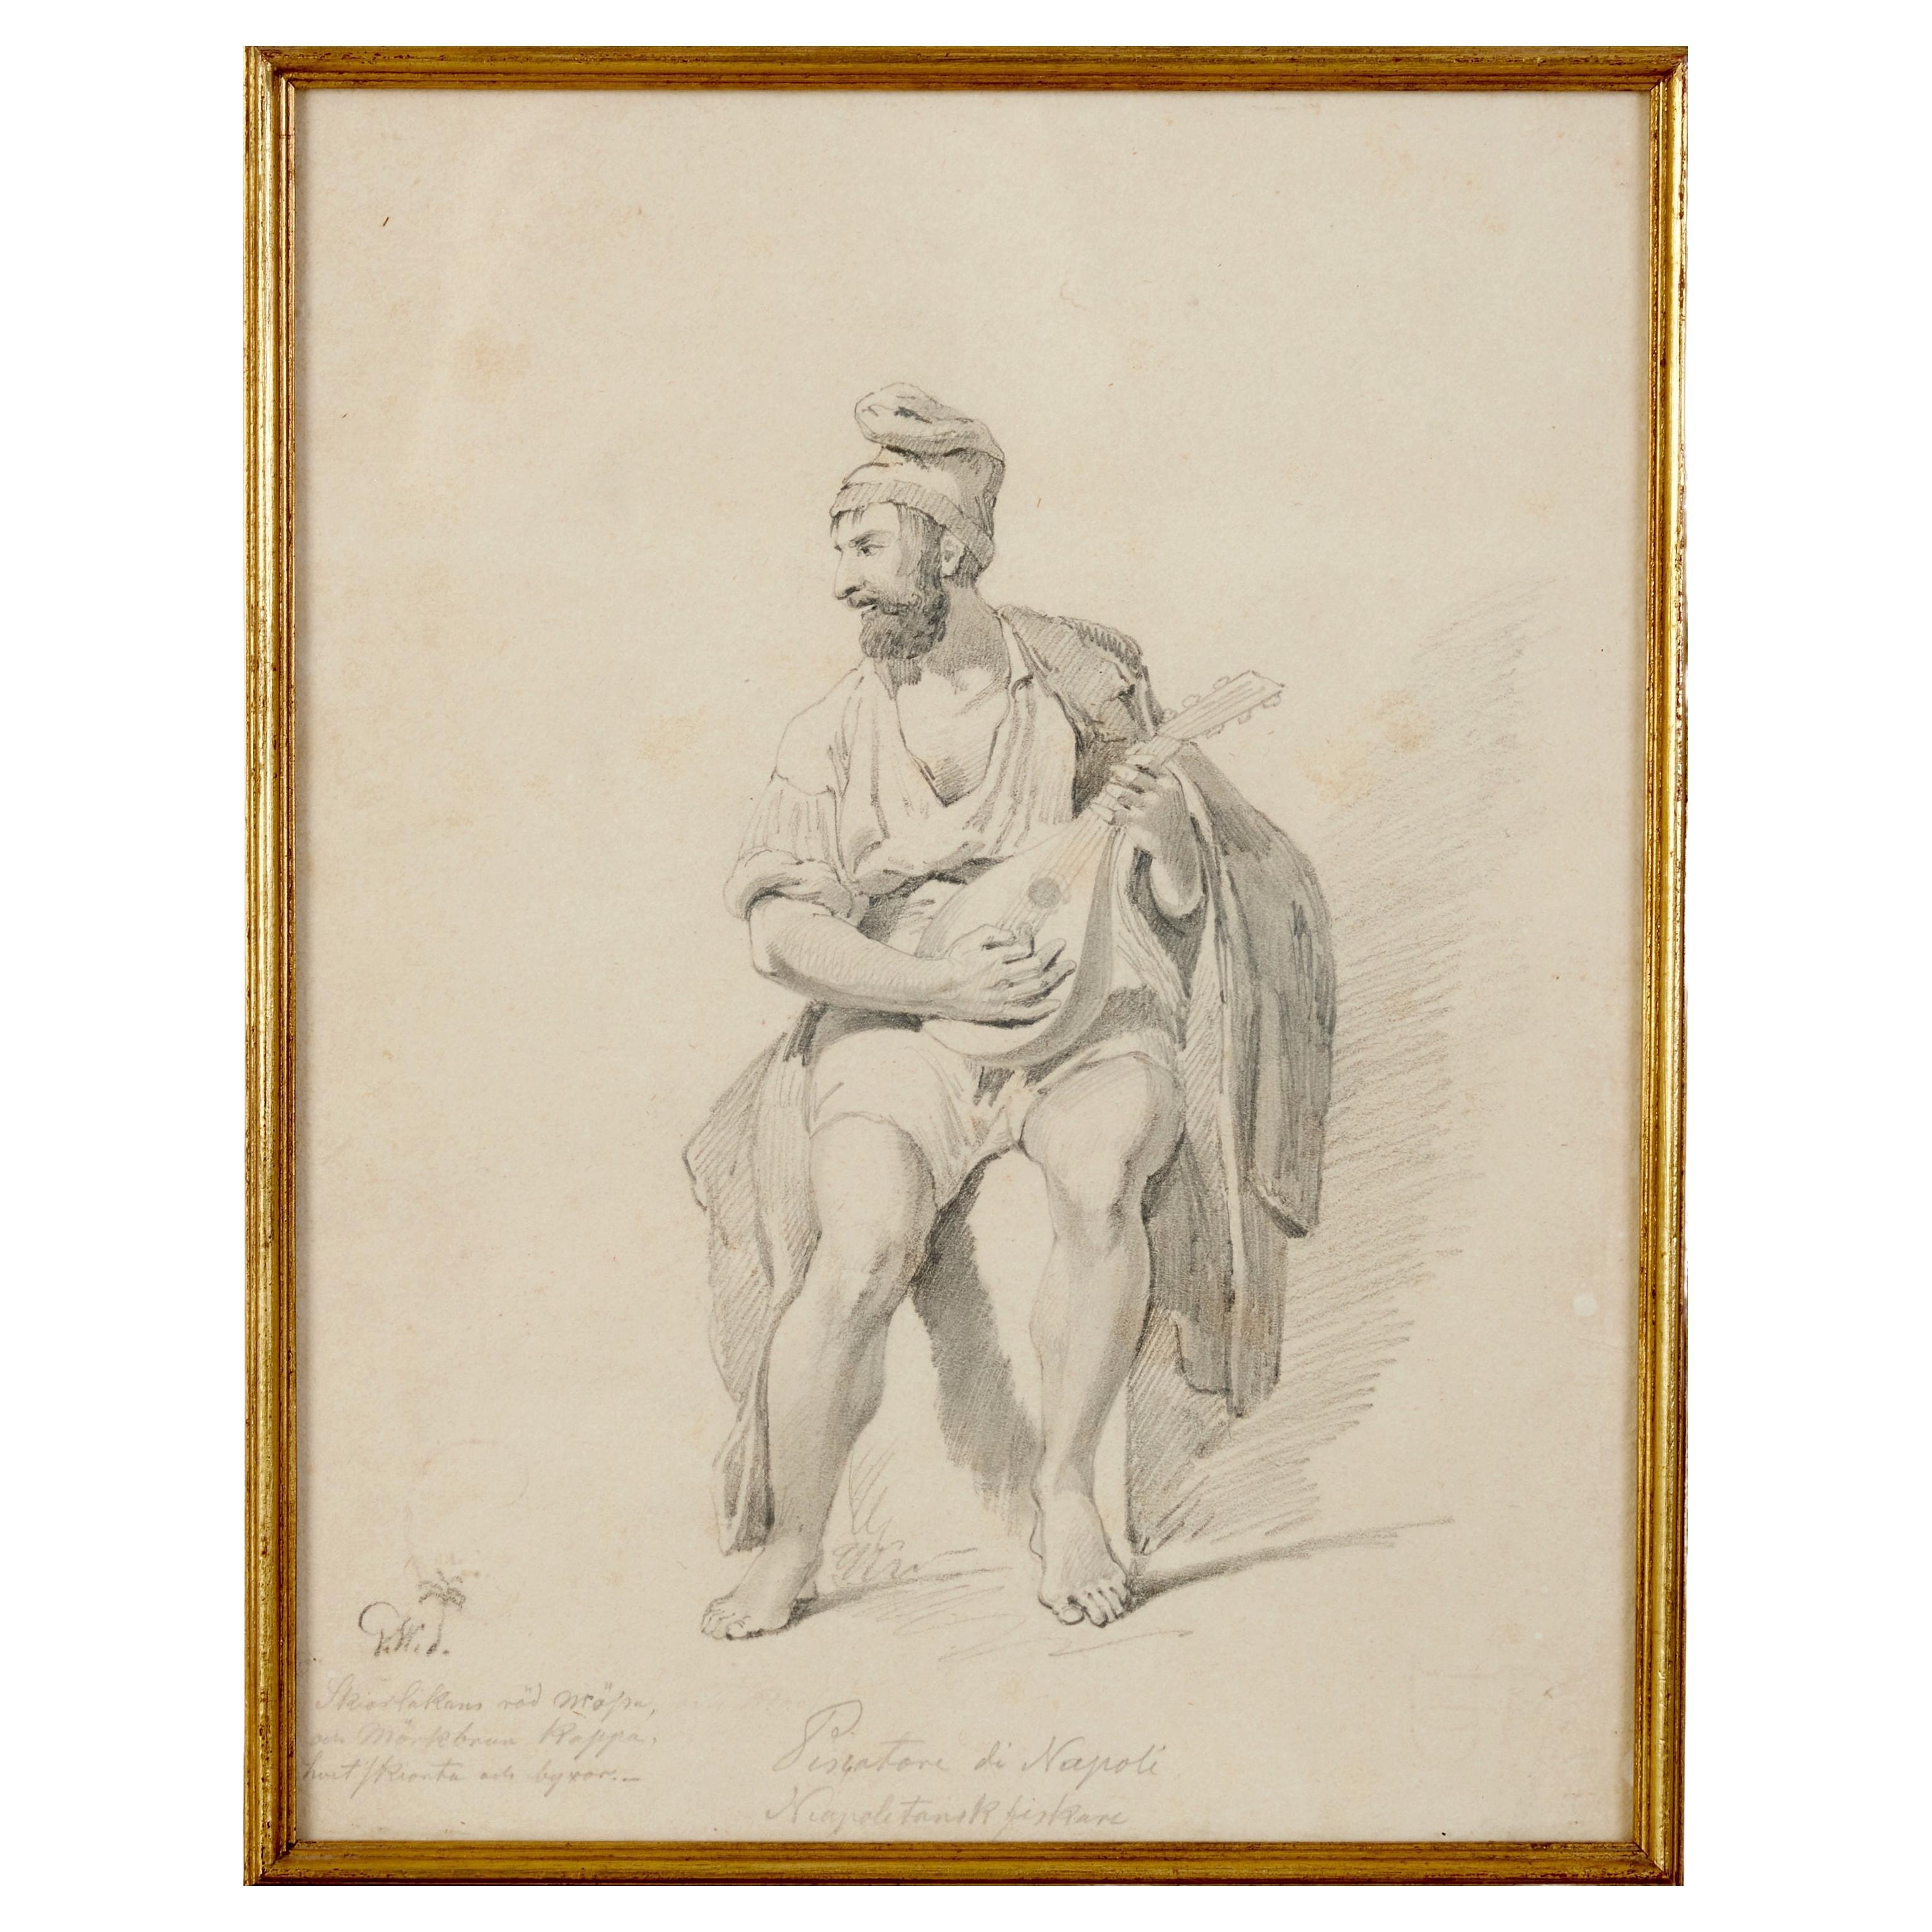 Gustav Wilhelm Palm, Pencil Drawing of a Neapolitan Fisherman Playing His Lute